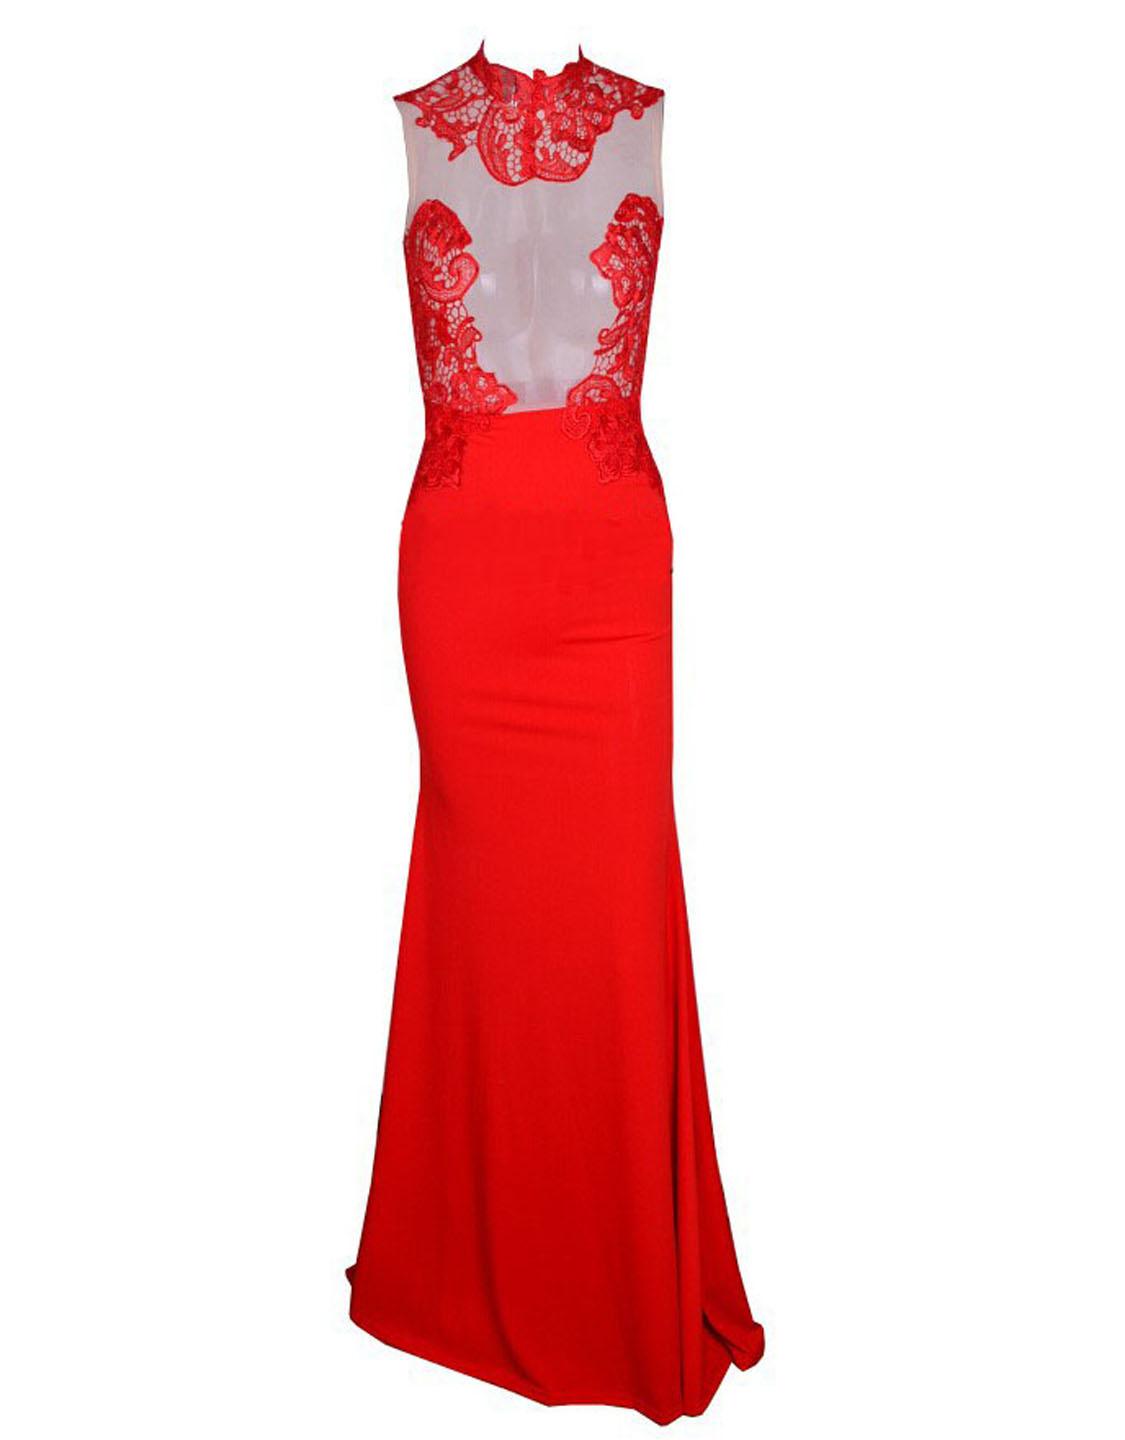 Red Lace Applique Mesh Maxi Dress Celebrity Style